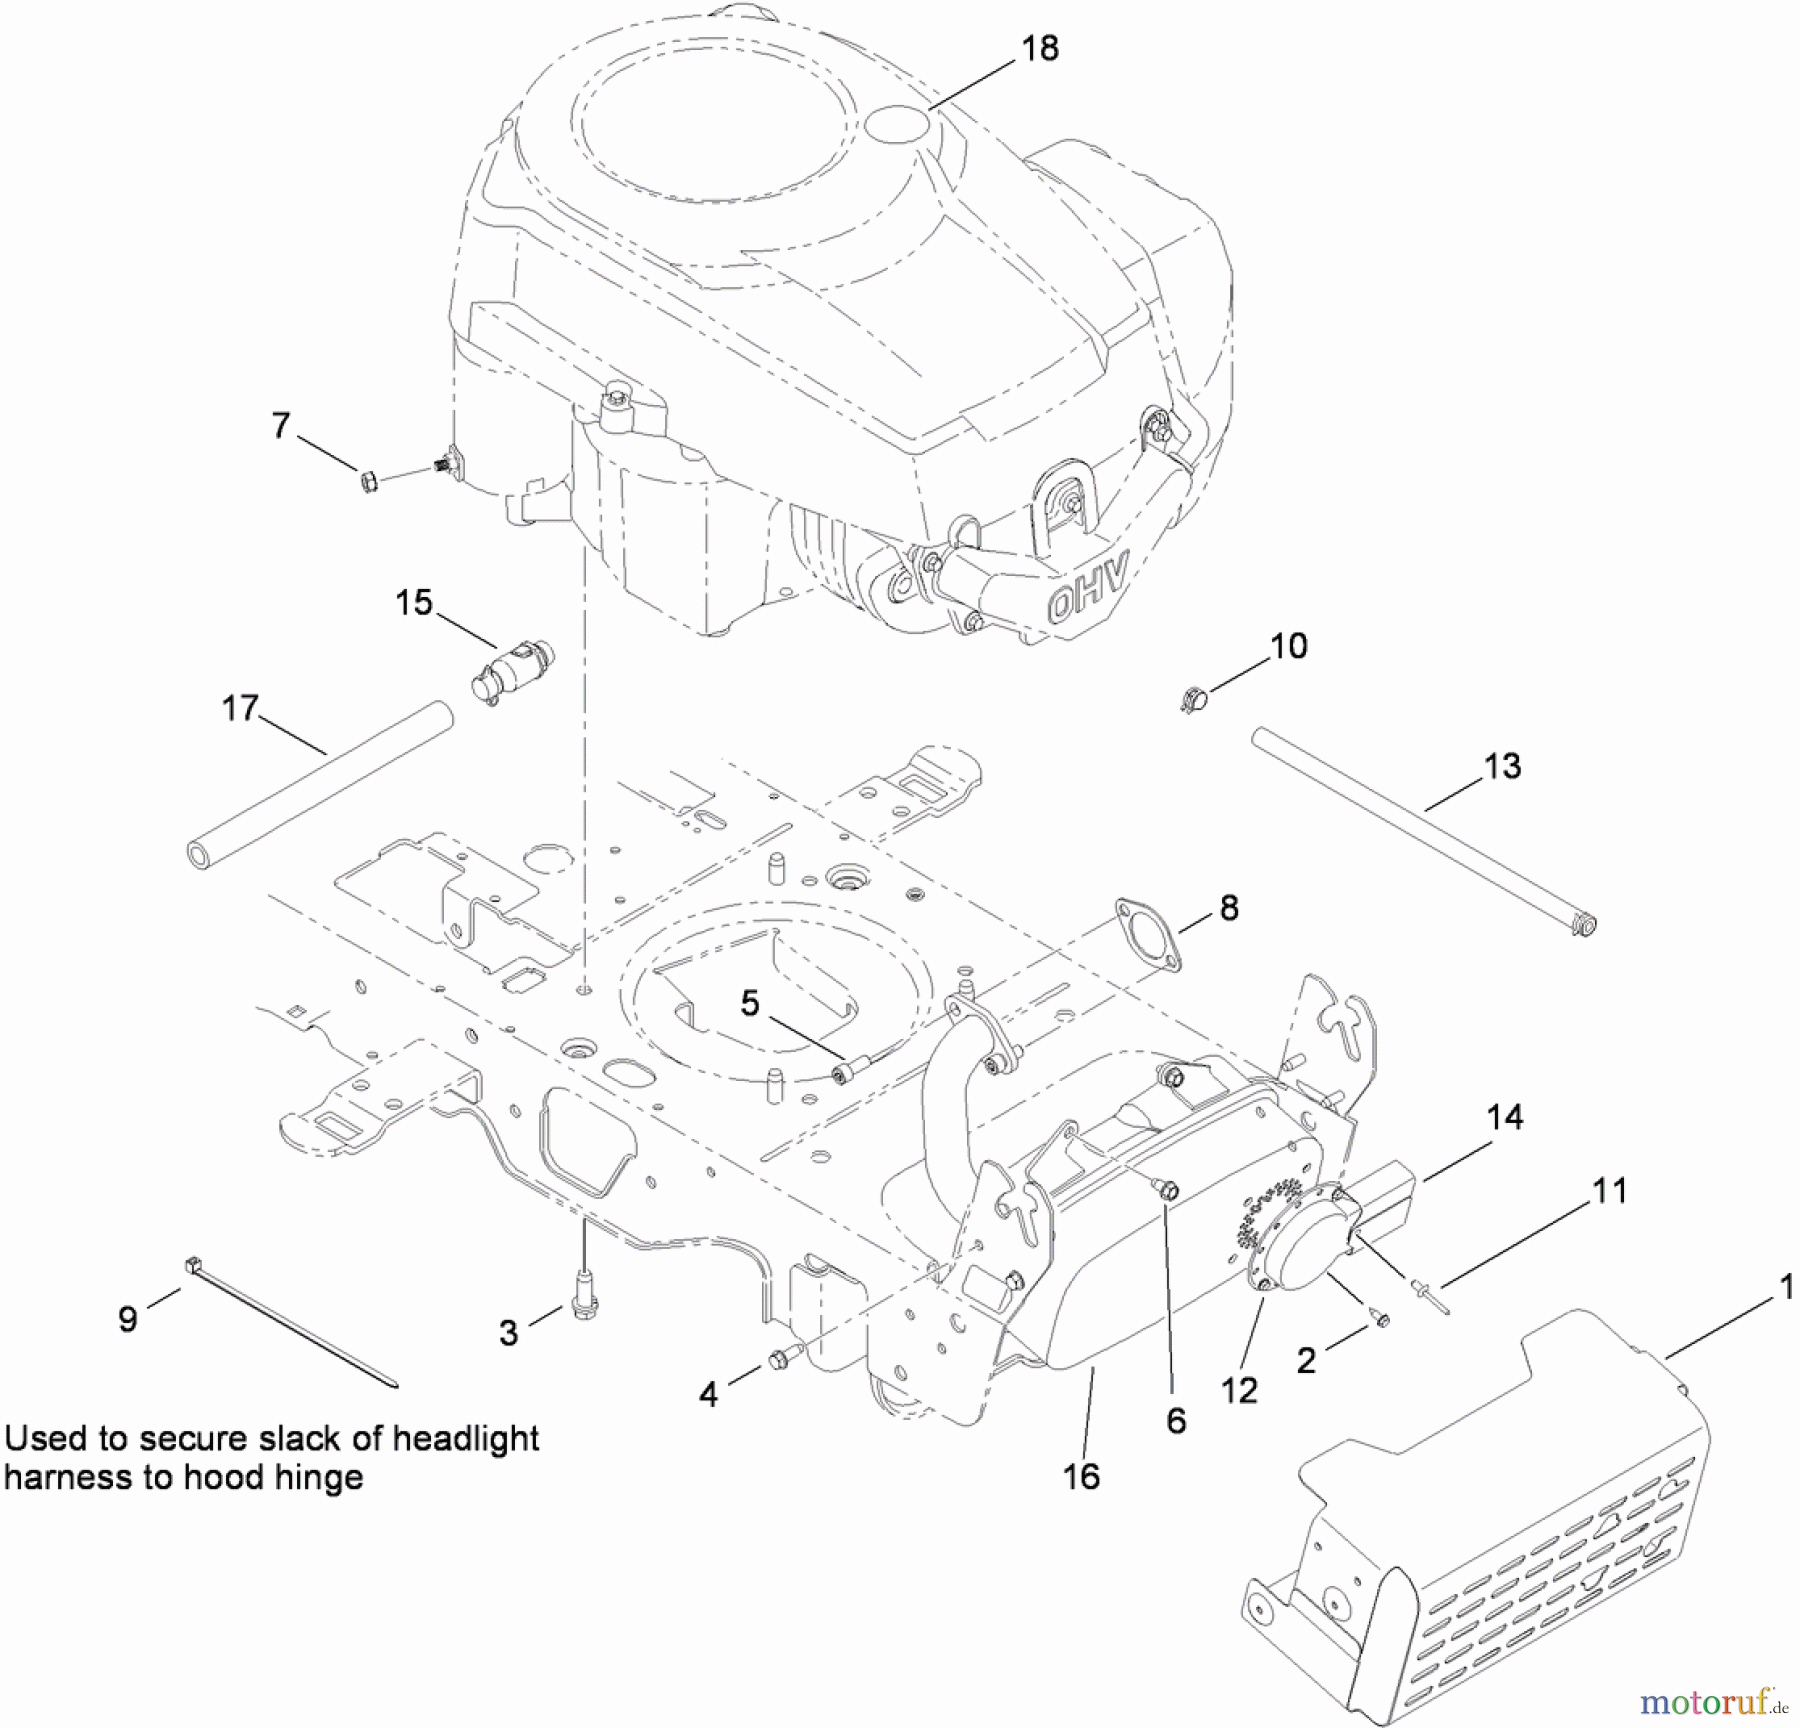  Toro Neu Mowers, Lawn & Garden Tractor Seite 1 13AX90RS848 (LX423) - Toro LX423 Lawn Tractor, 2012 (SN 1-1) MUFFLER AND SHIELD ASSEMBLY